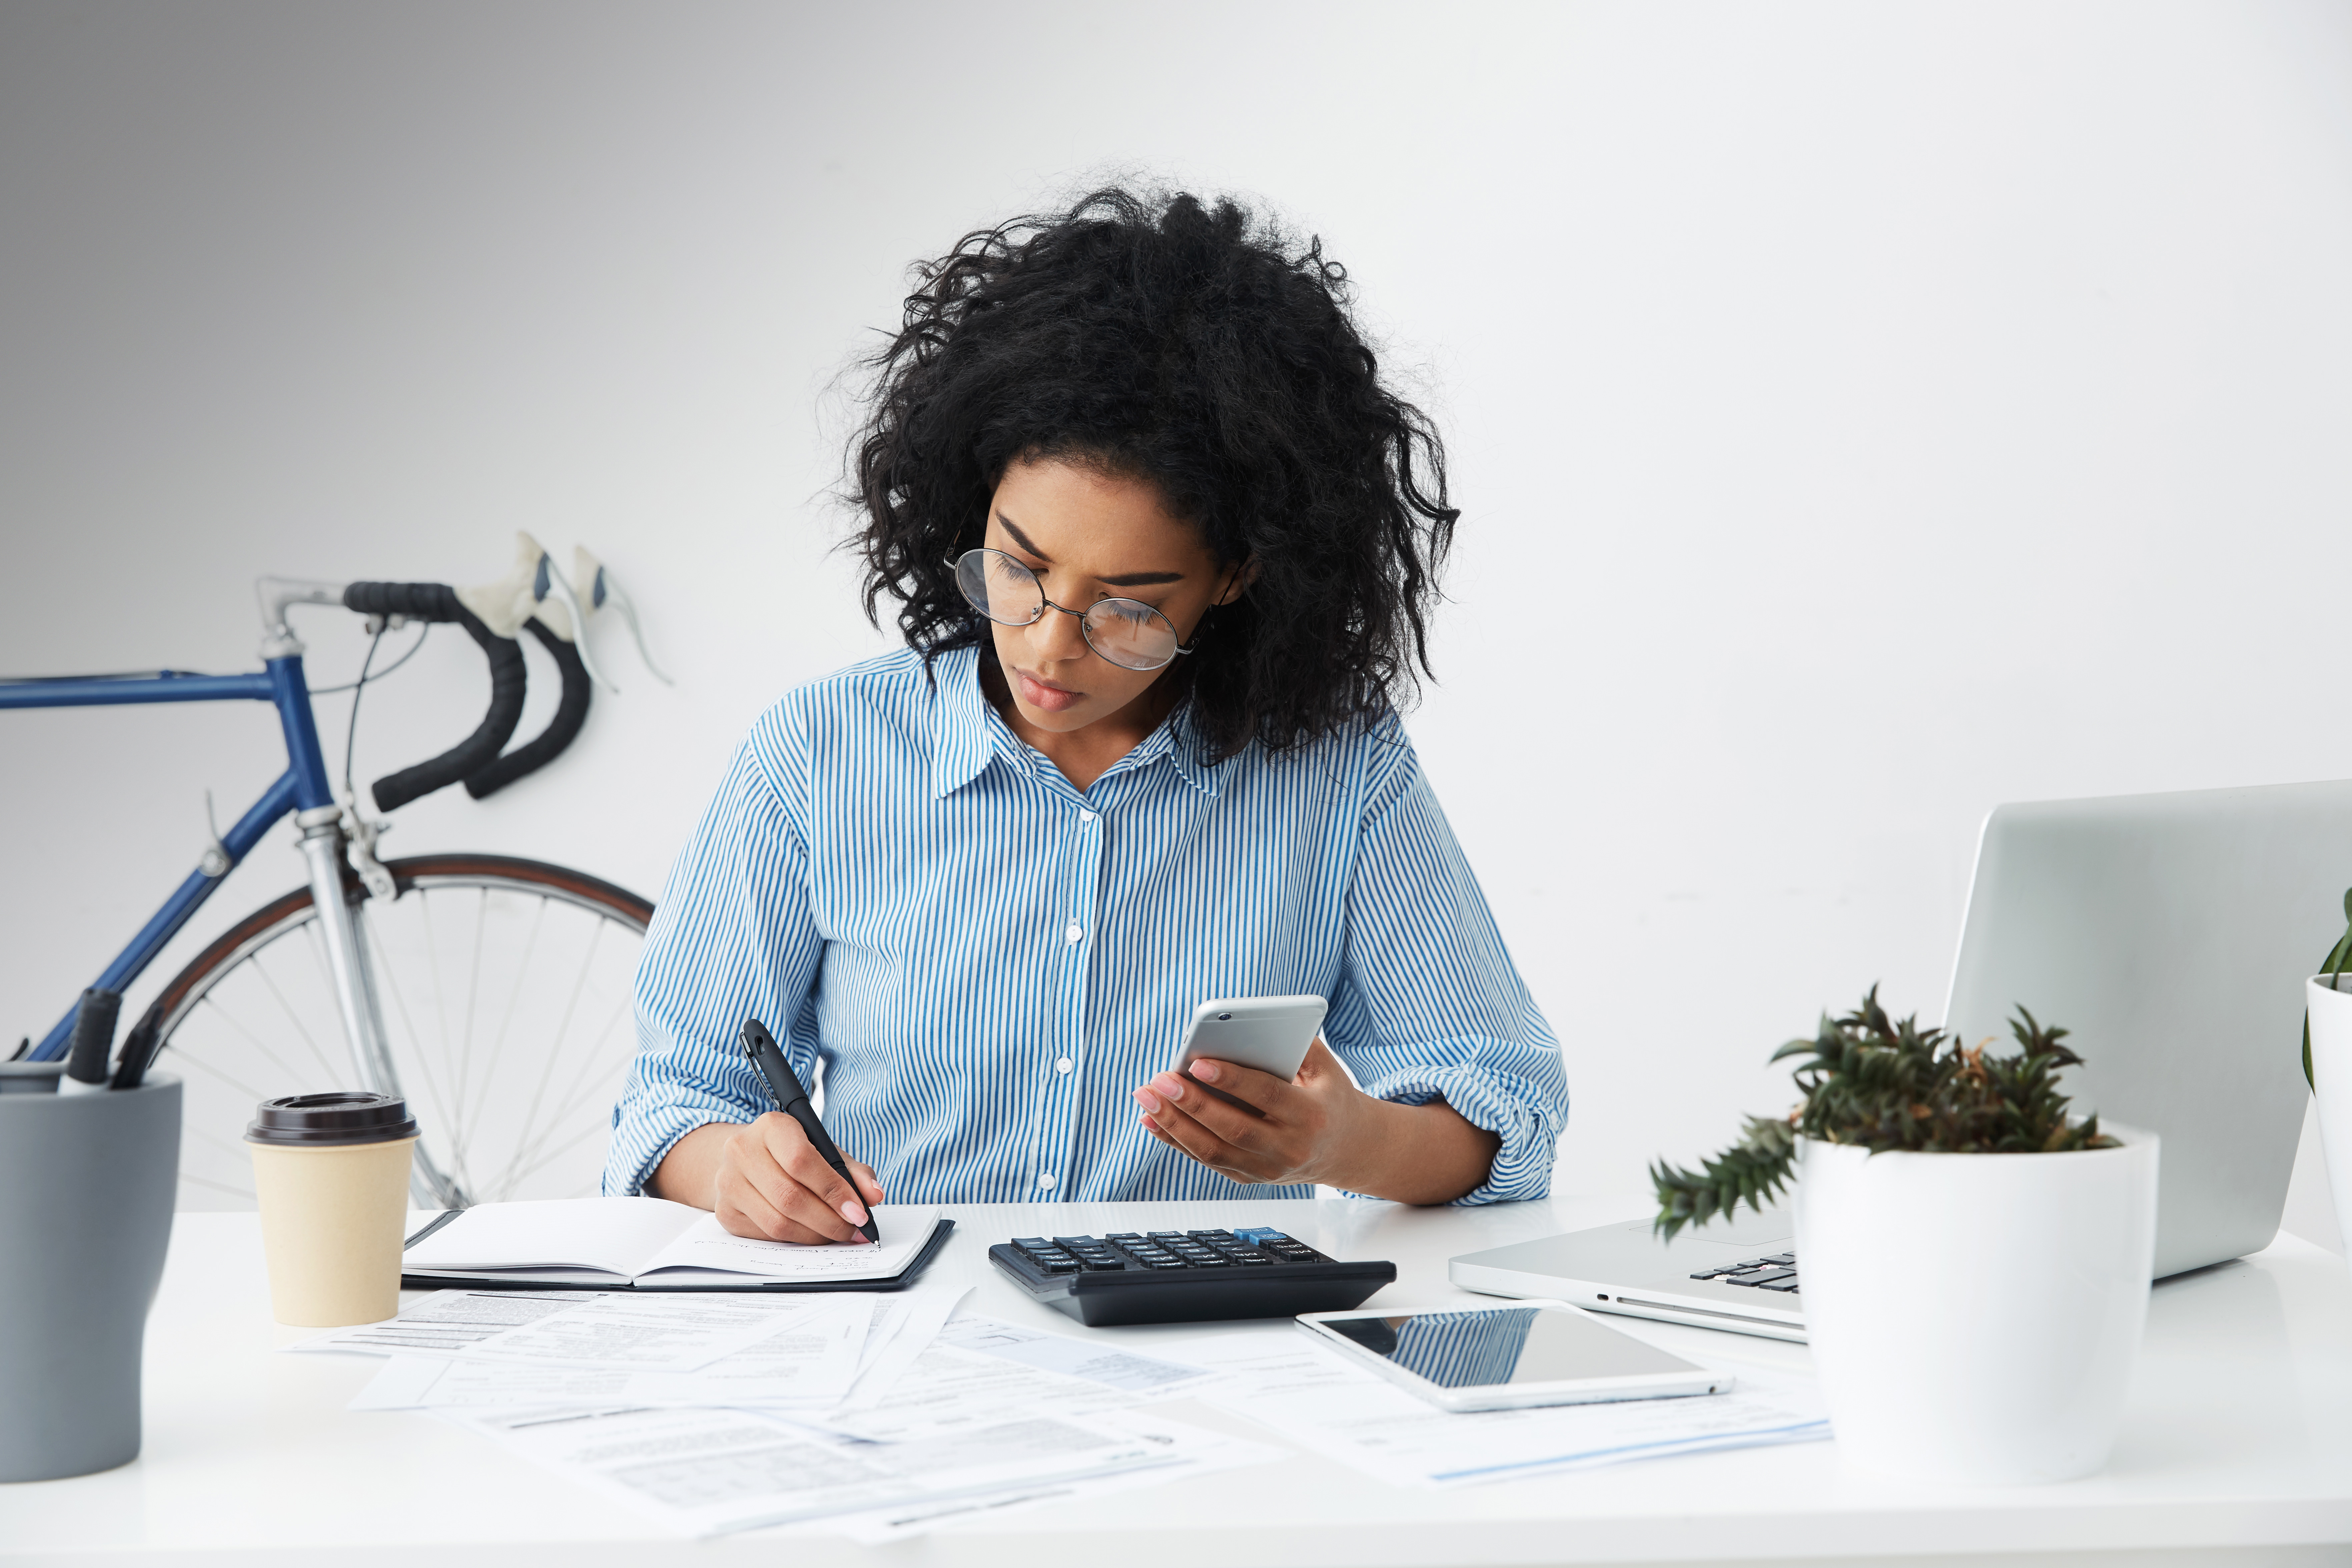 Concentrated female holding phone and making notes while planning budget and calculating bills